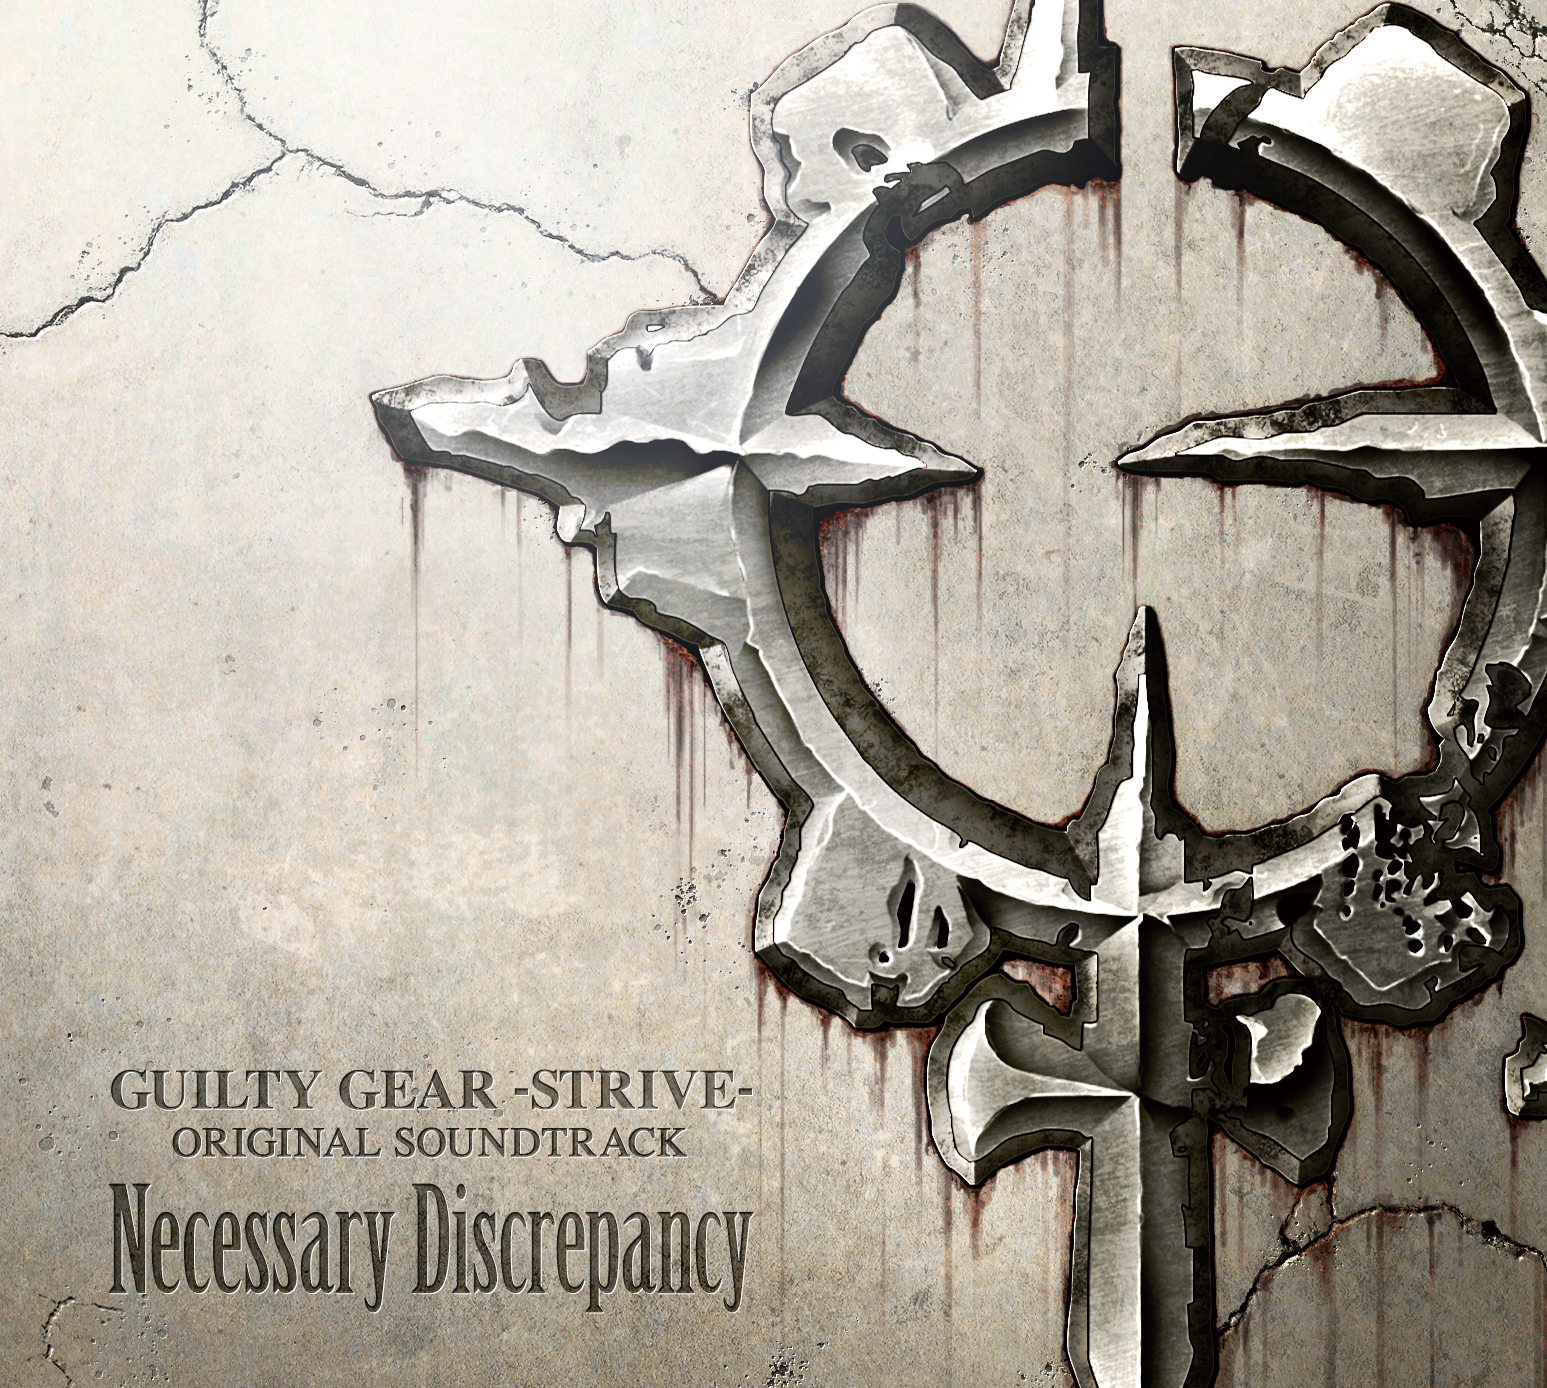 LET’S ROCK to Guilty Gear -Strive- OST !